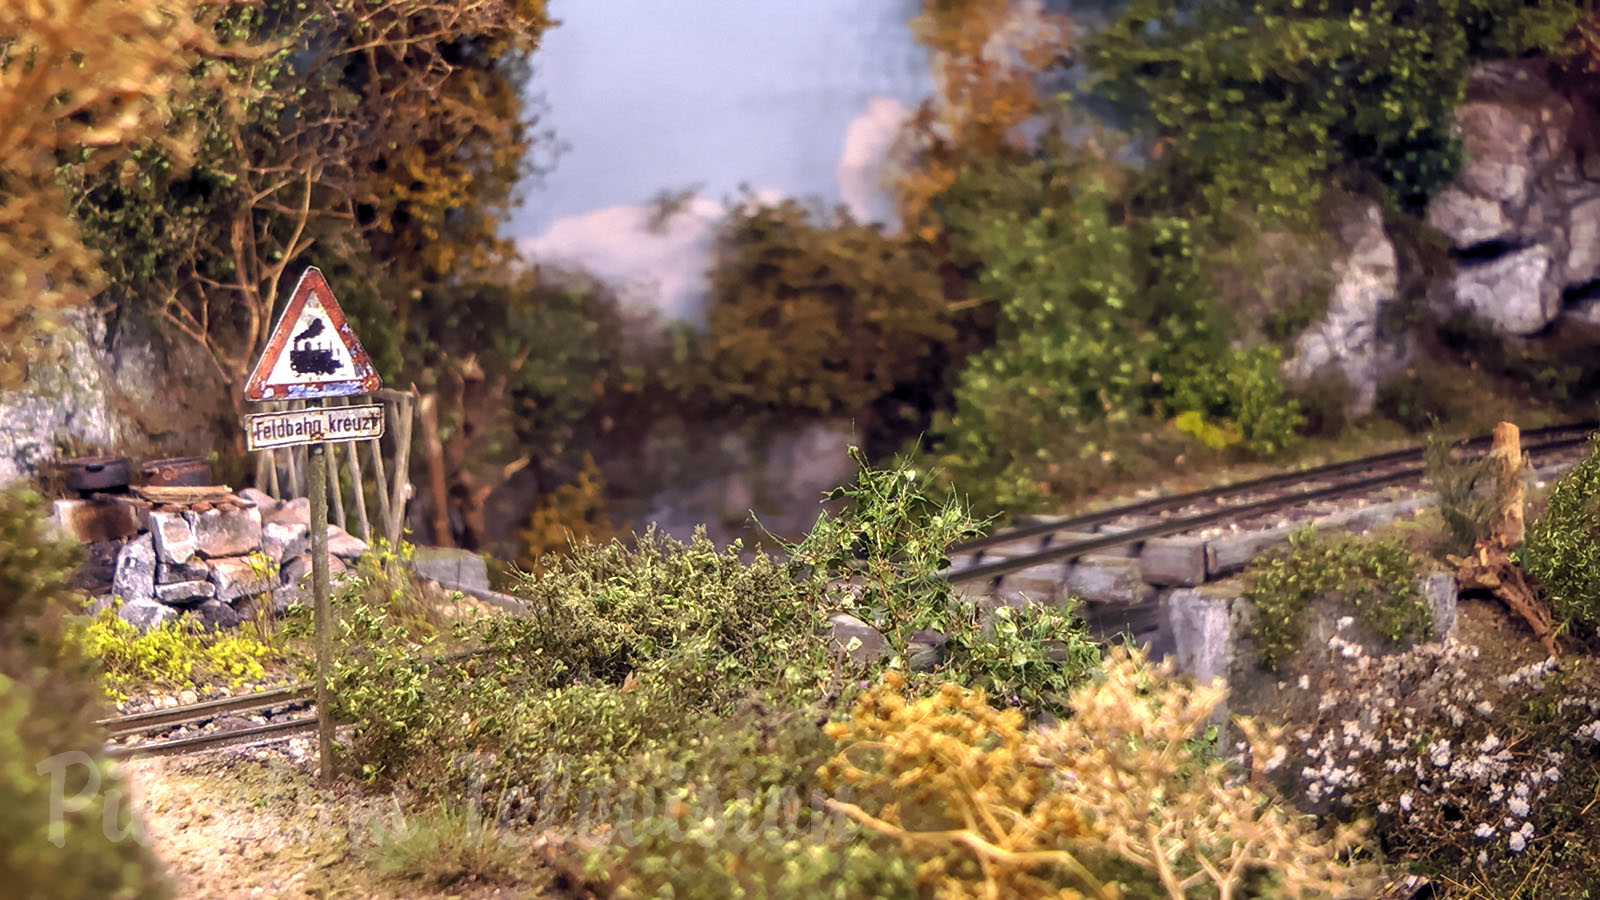 One of the most beautiful model train layouts of field railways - 1/35 diorama of trench railways